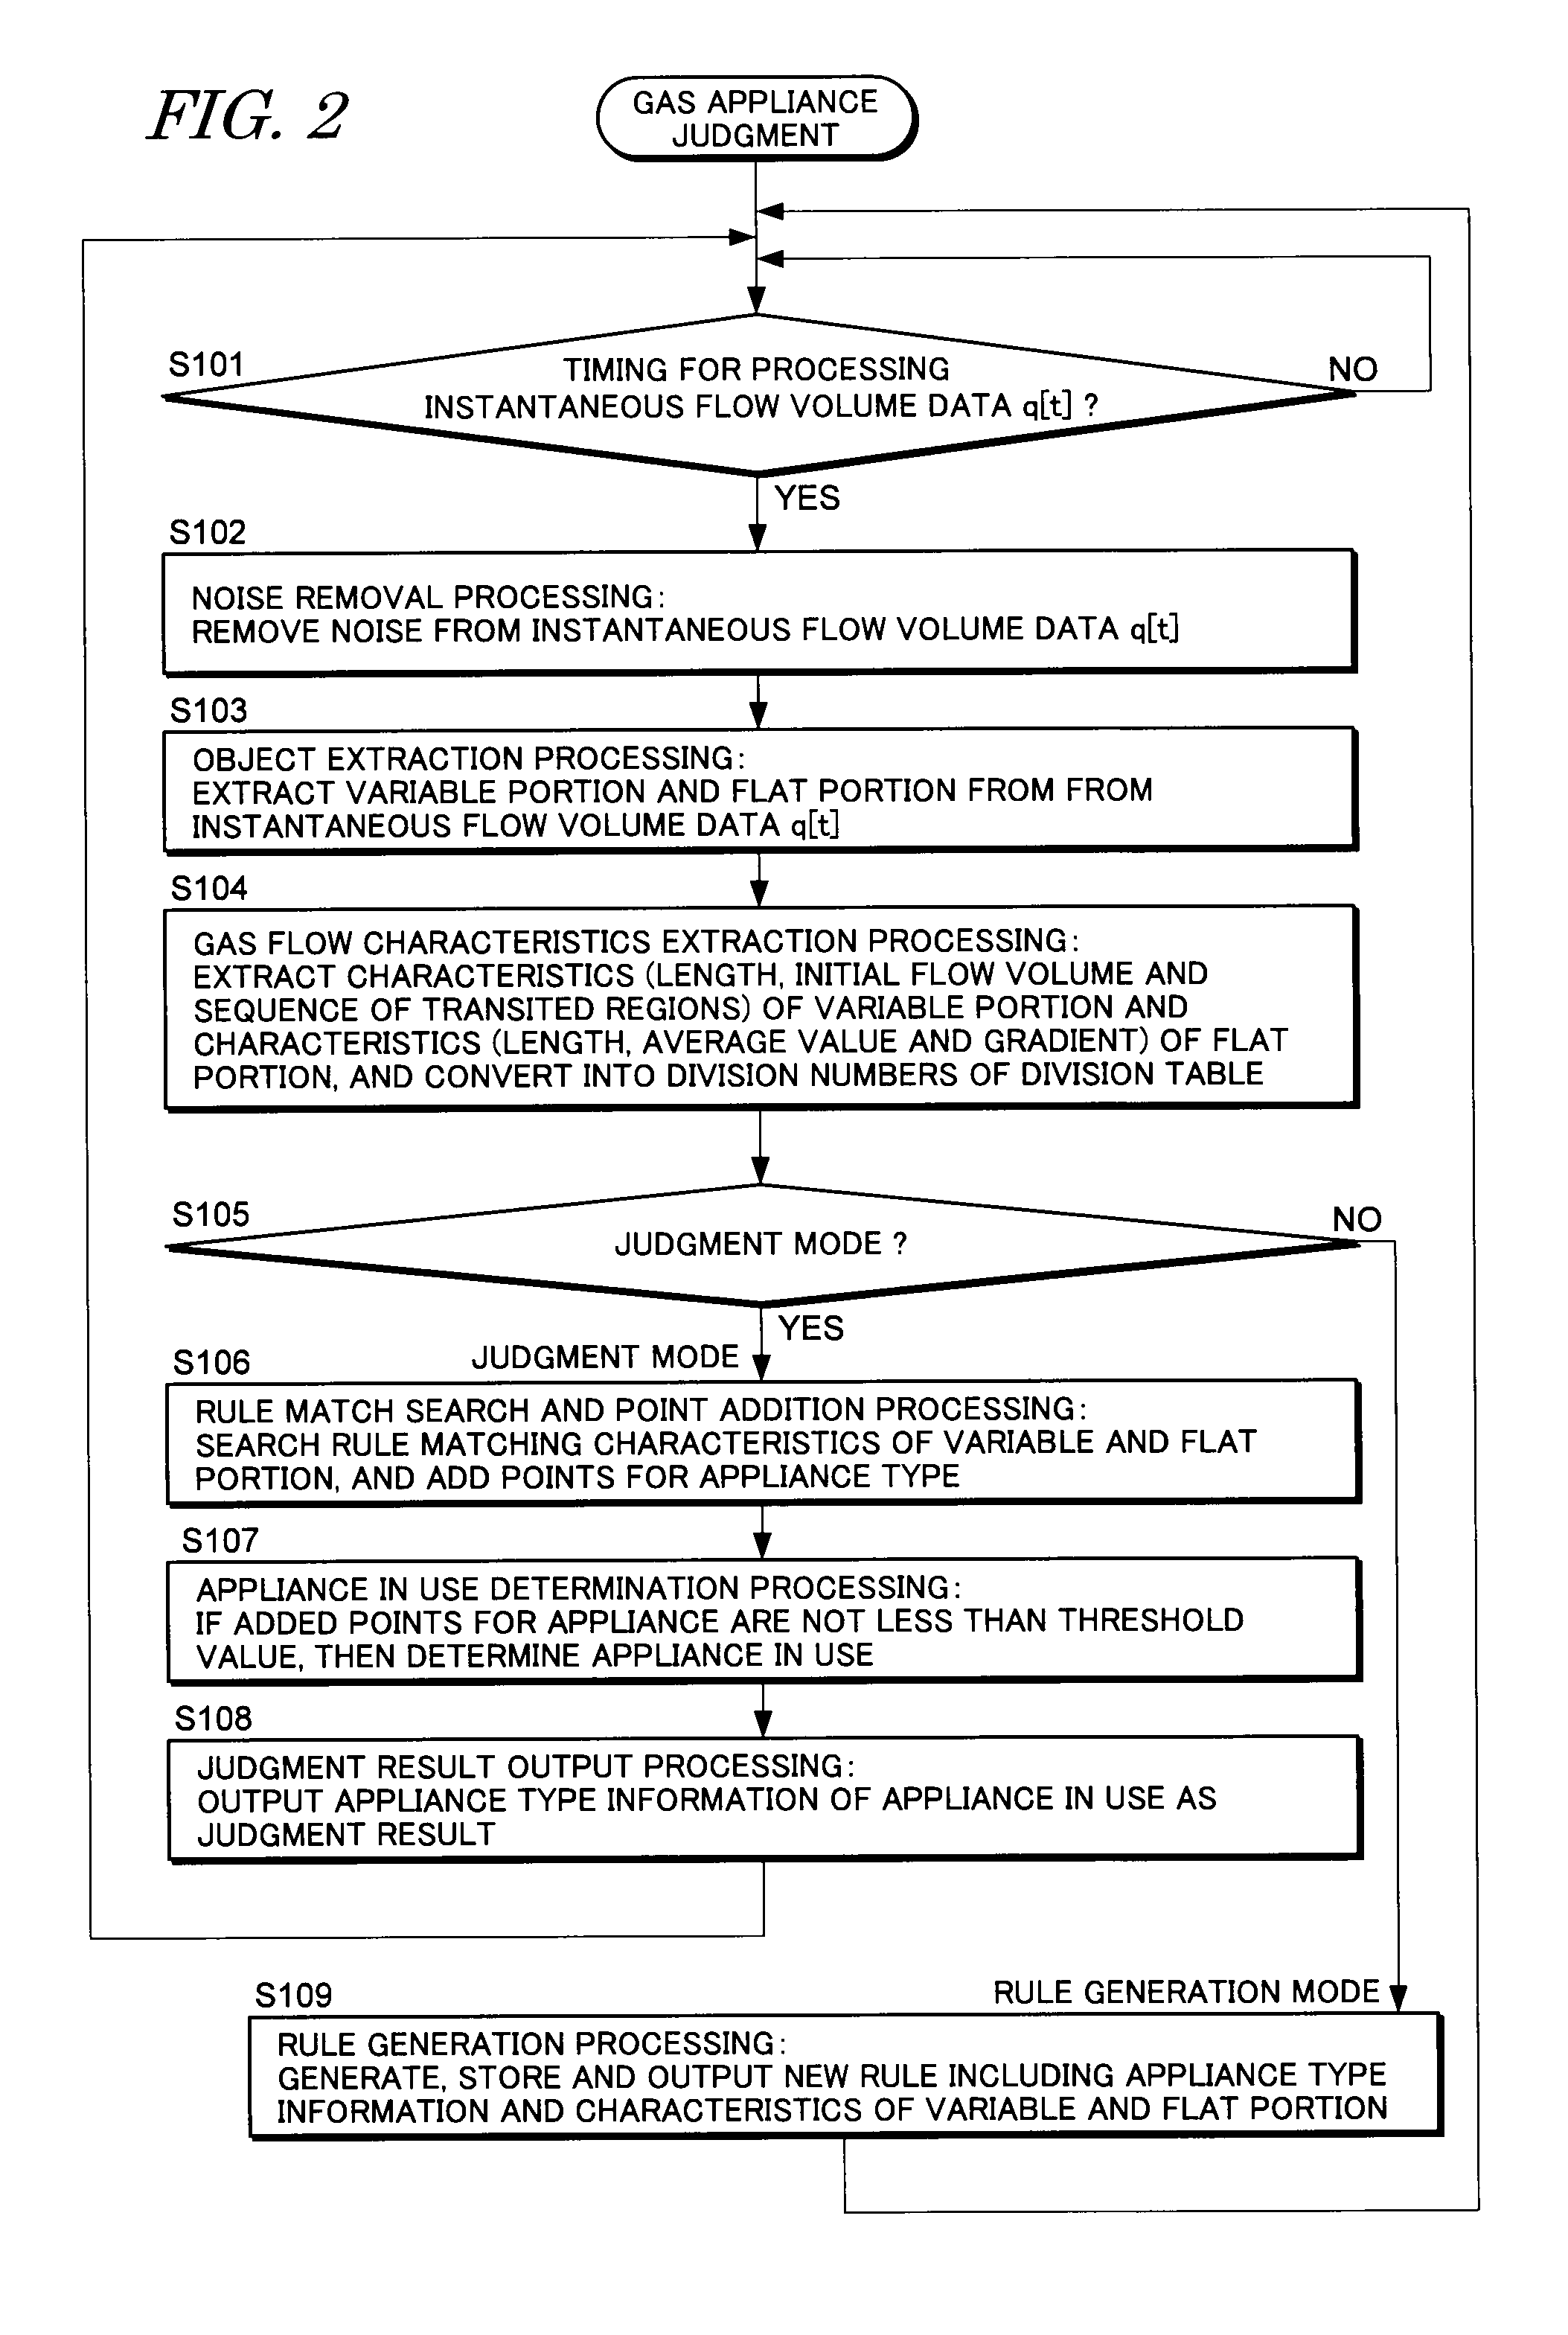 Gas appliance judgement apparatus and method